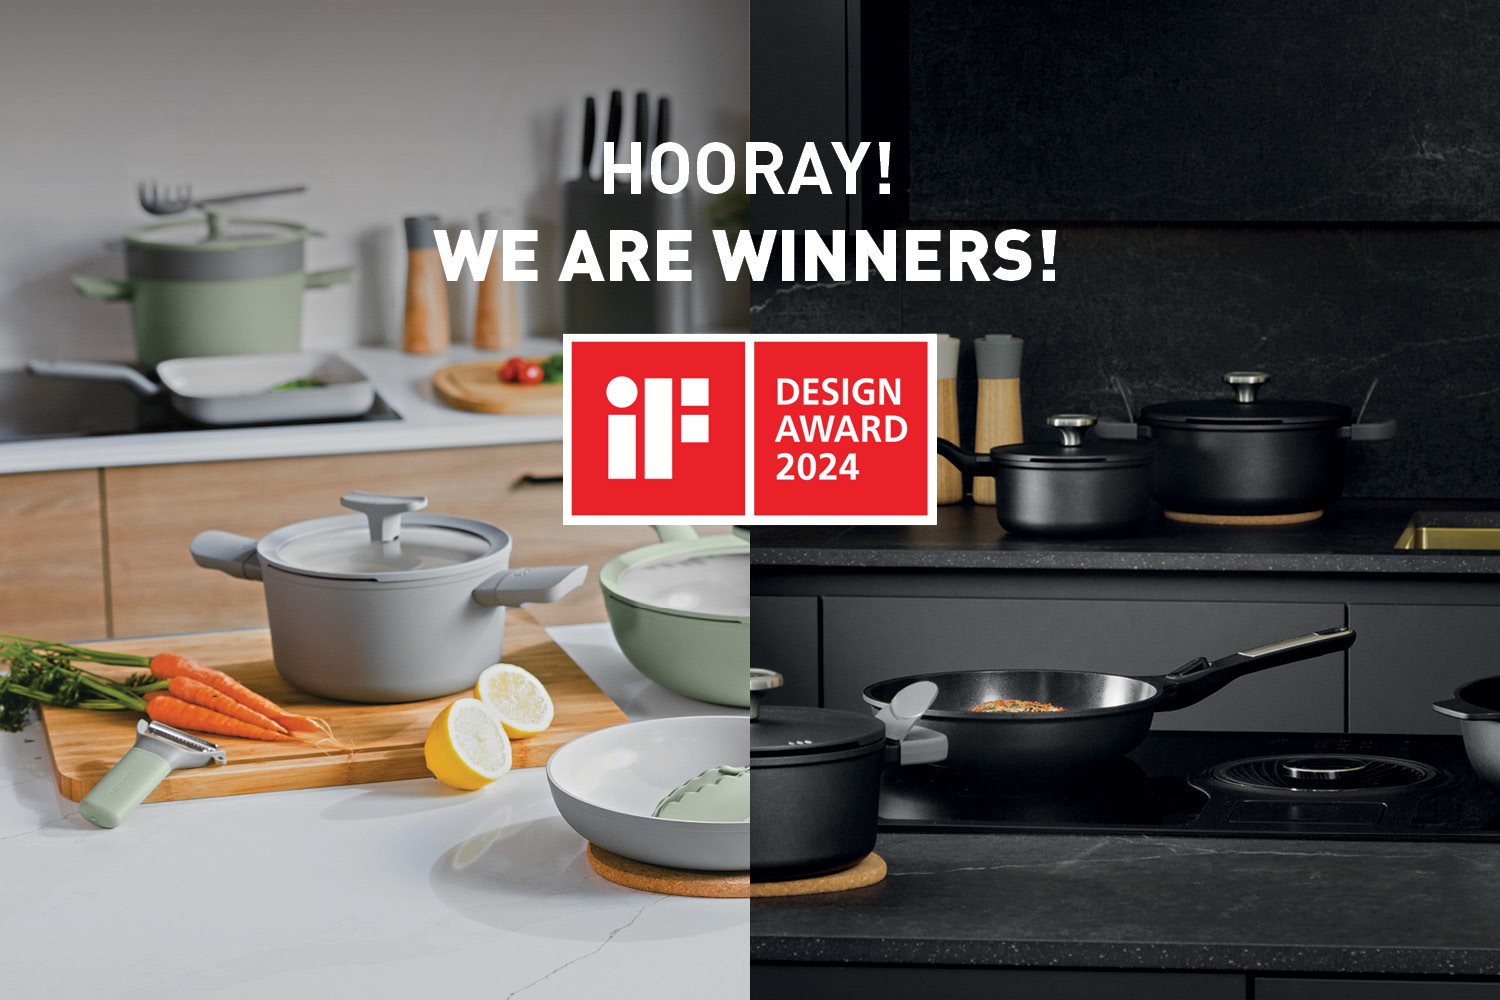 We are a two-time iF Design Award 2024 winner!